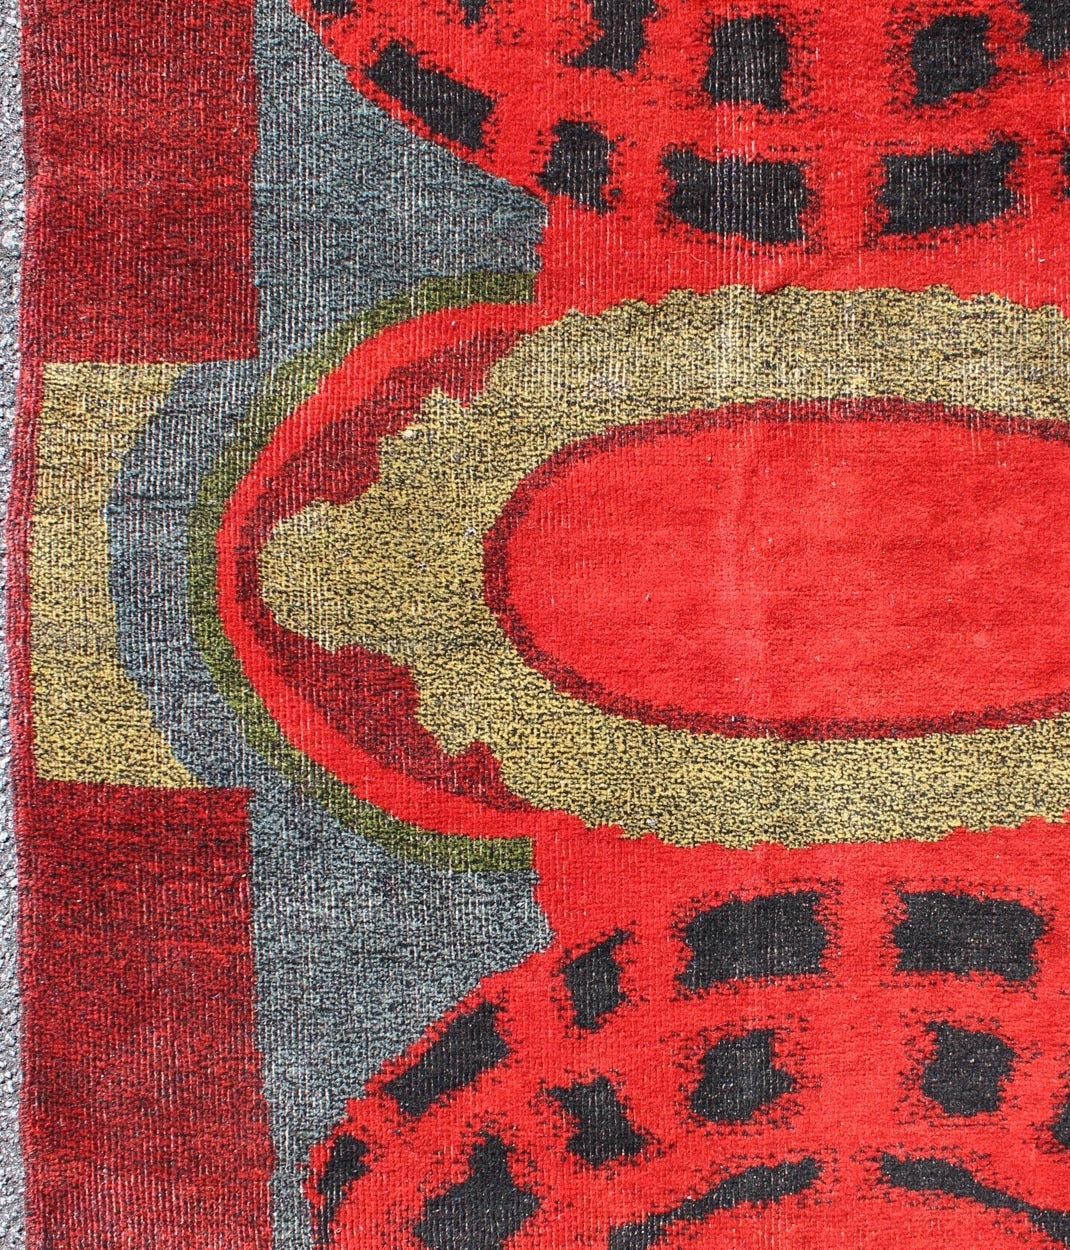  Art Nouveau Design Rug from the Mid 20th Century in Red, Green, Blue & Black .
This rug reinvents an aesthetic design that evokes a modern pattern. A dramatic blend of reds, oranges, and black contrast with lighter colors to create a distinctively